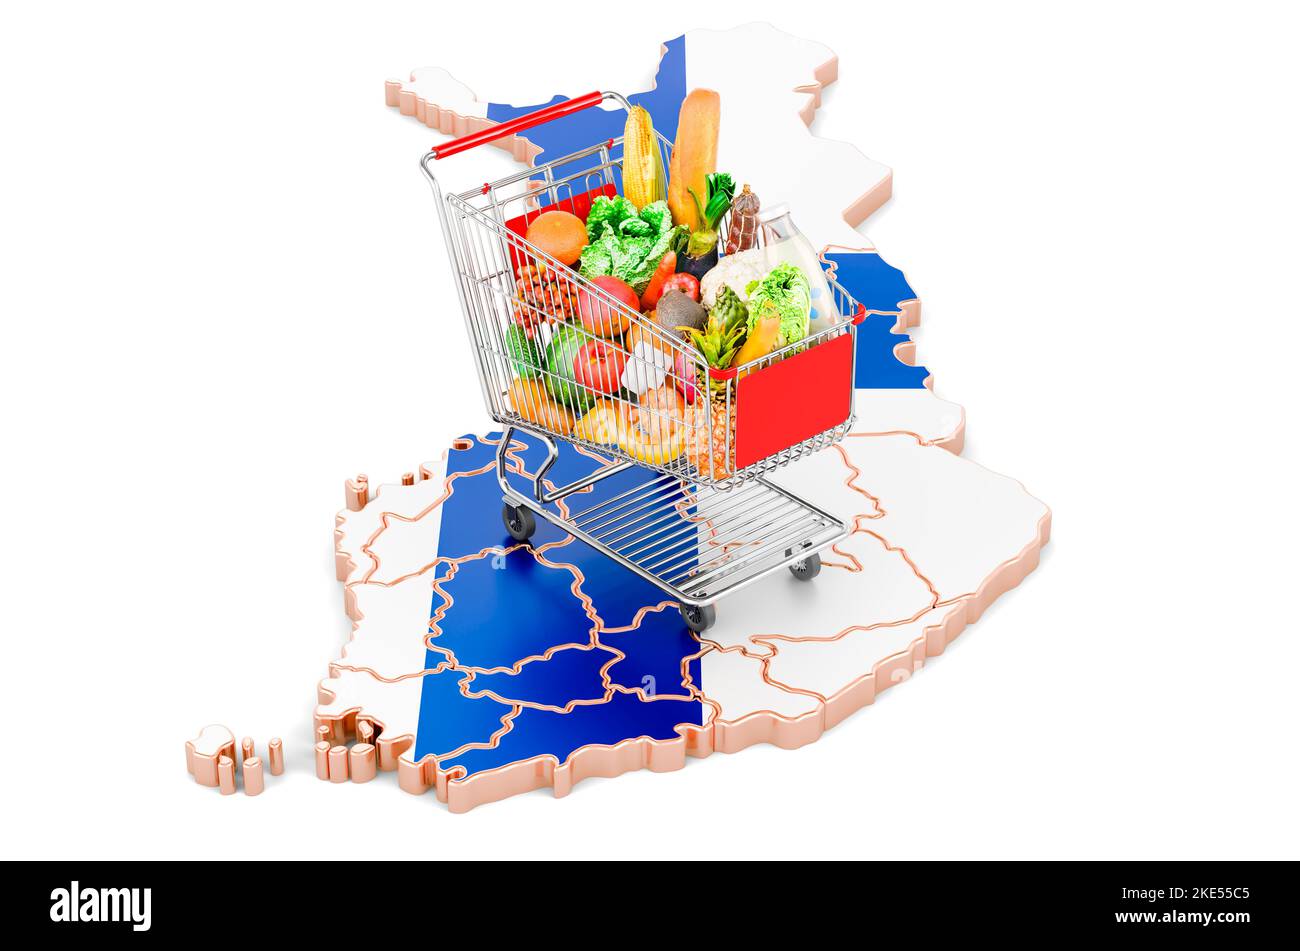 Purchasing power in Finland concept. Shopping cart with Finnish map, 3D rendering isolated on white background Stock Photo